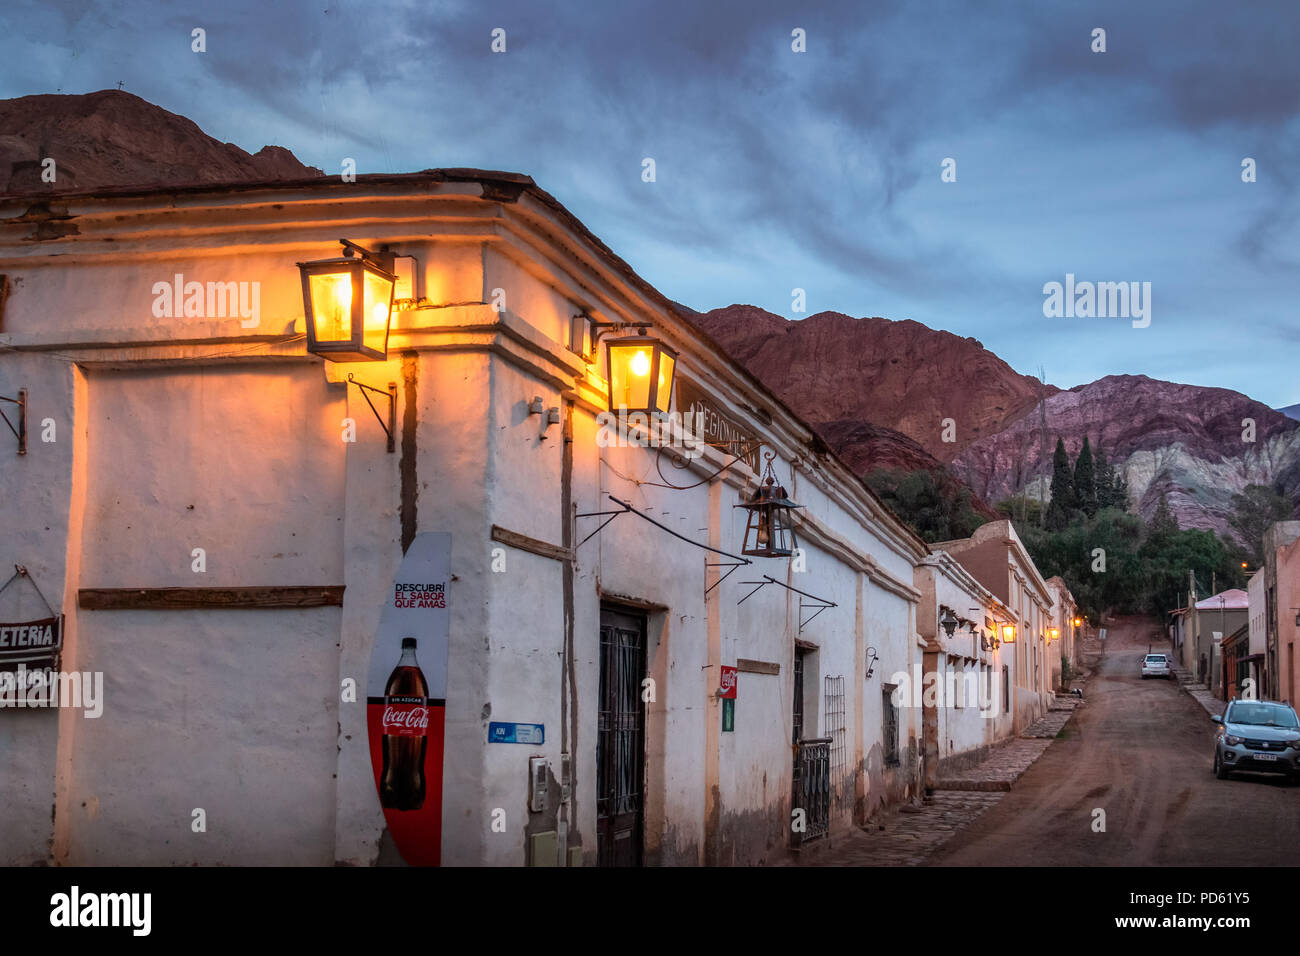 Purmamarca town at night with the Hill of Seven Colors (Cerro de los siete colores) on background  - Purmamarca, Jujuy, Argentina Stock Photo